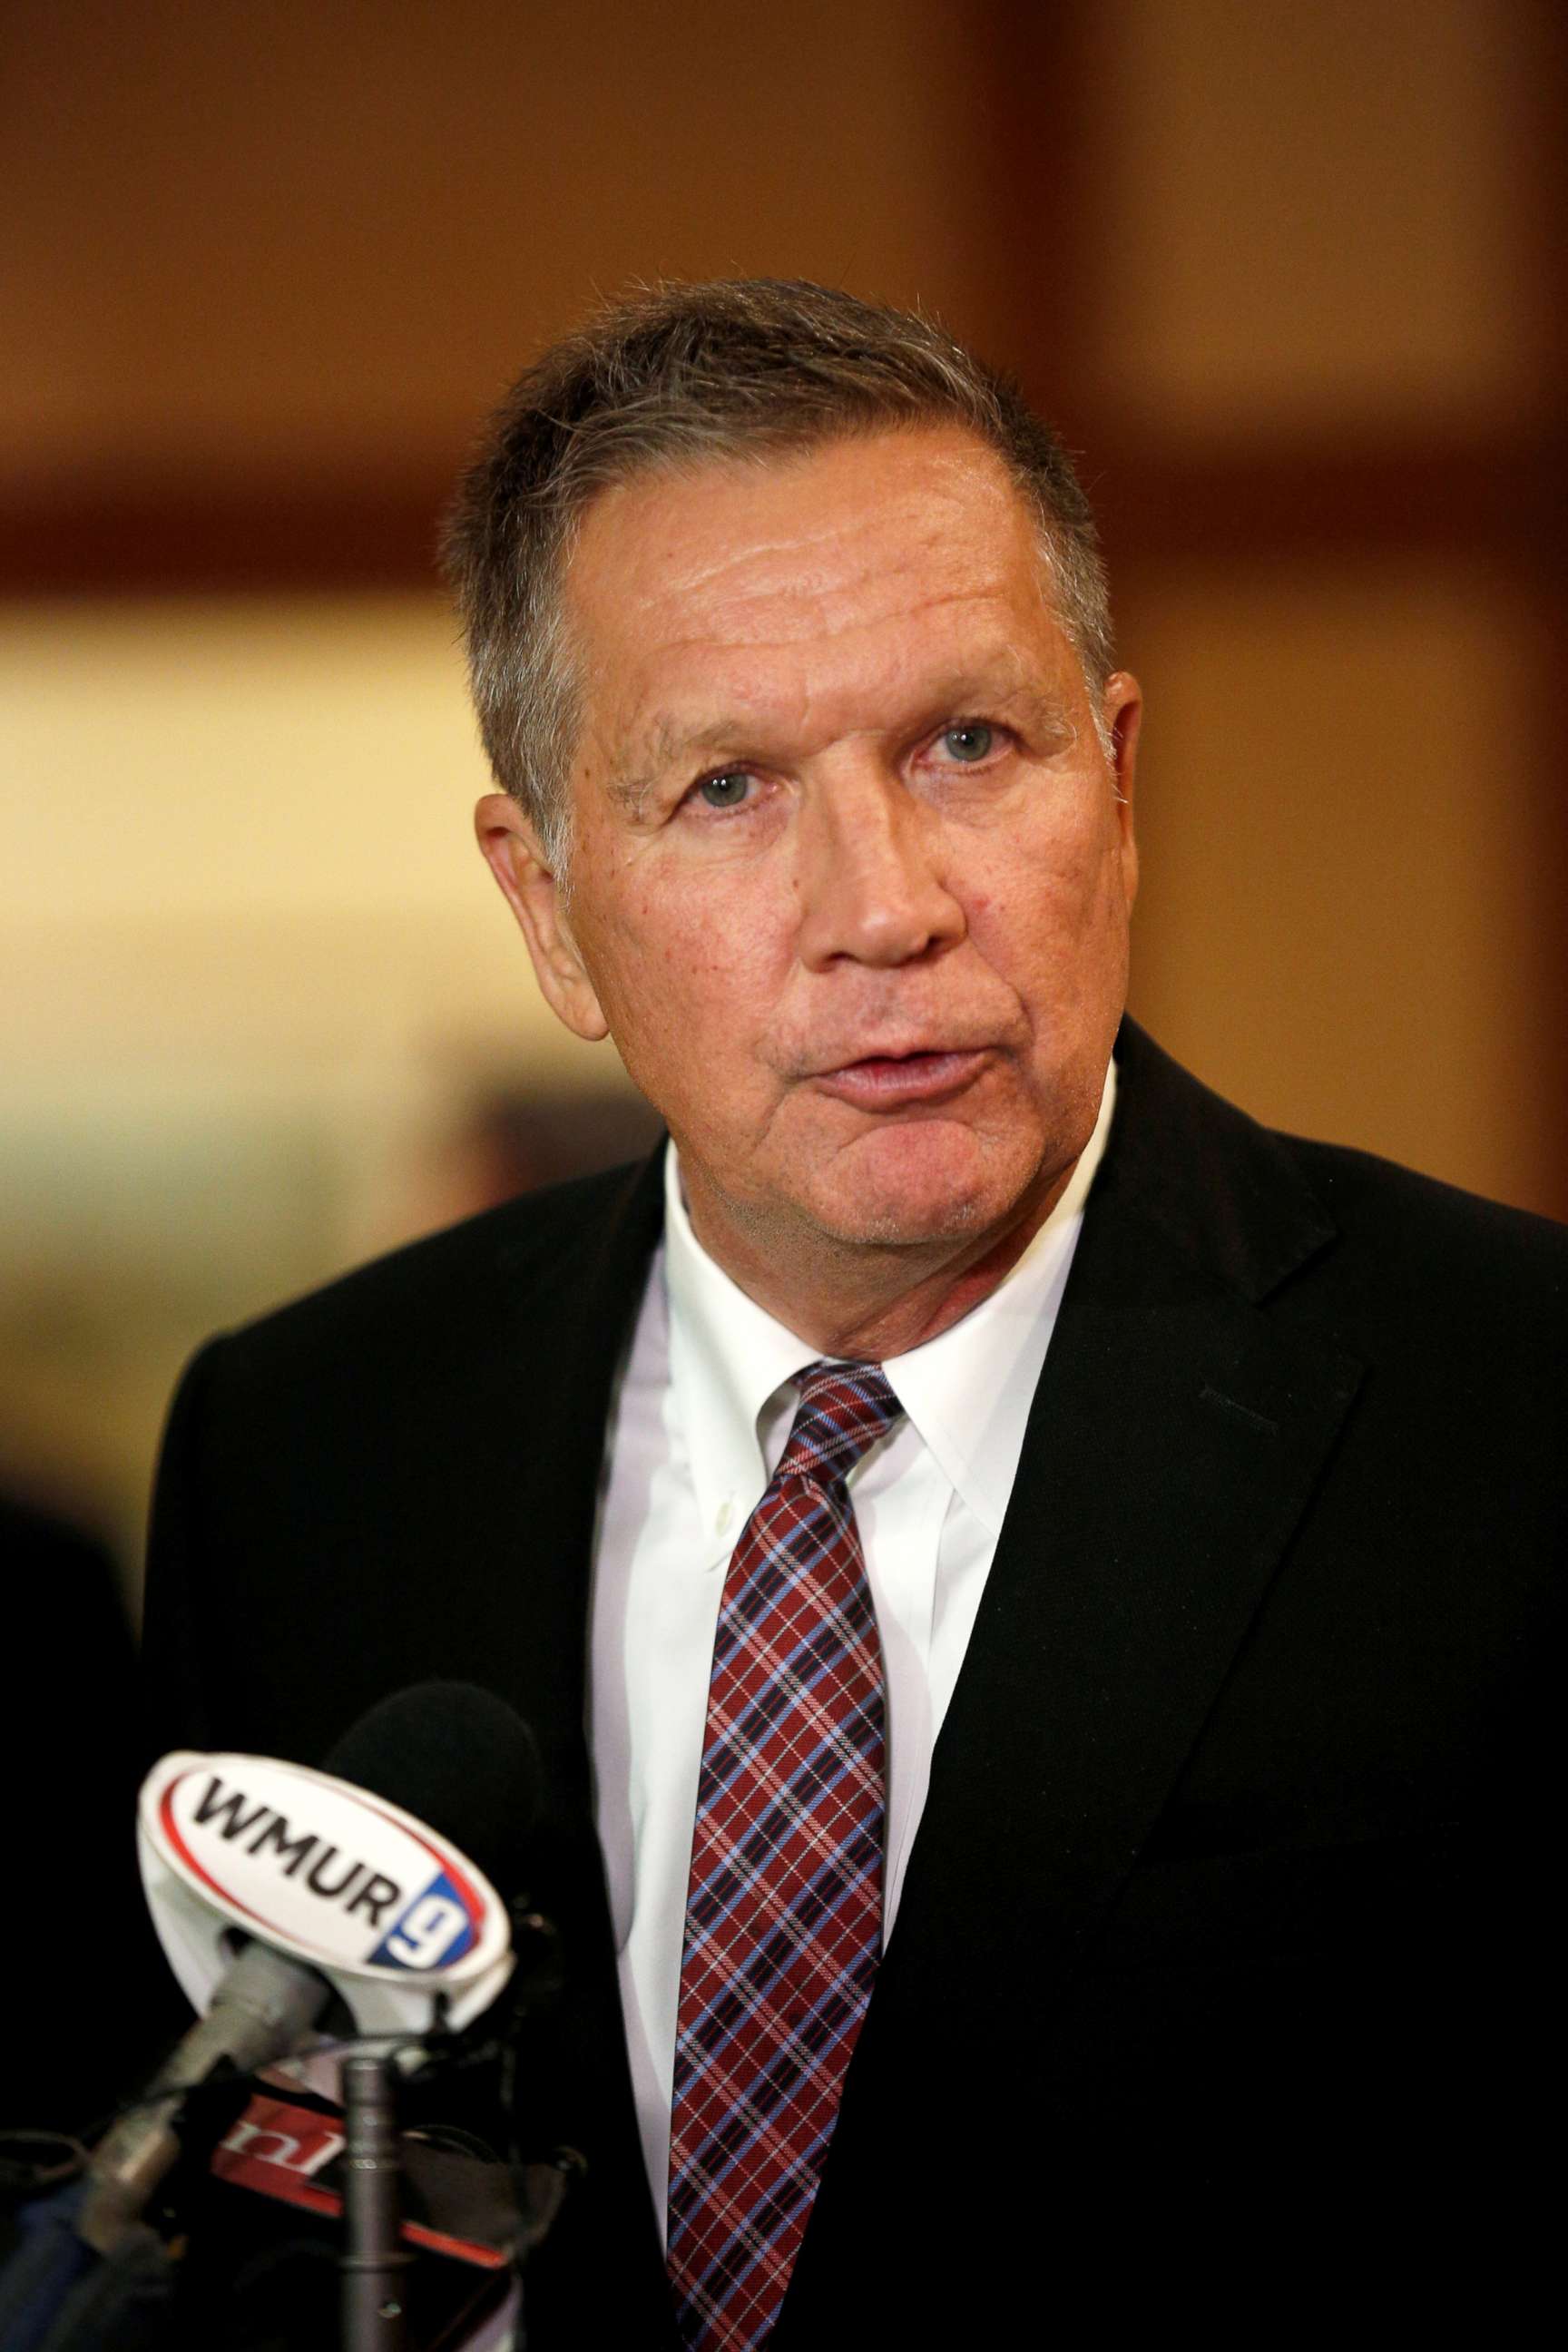 PHOTO: Ohio Governor and former presidential candidate John Kasich speaks to the press in Concord, N.H., Nov. 15, 2018.